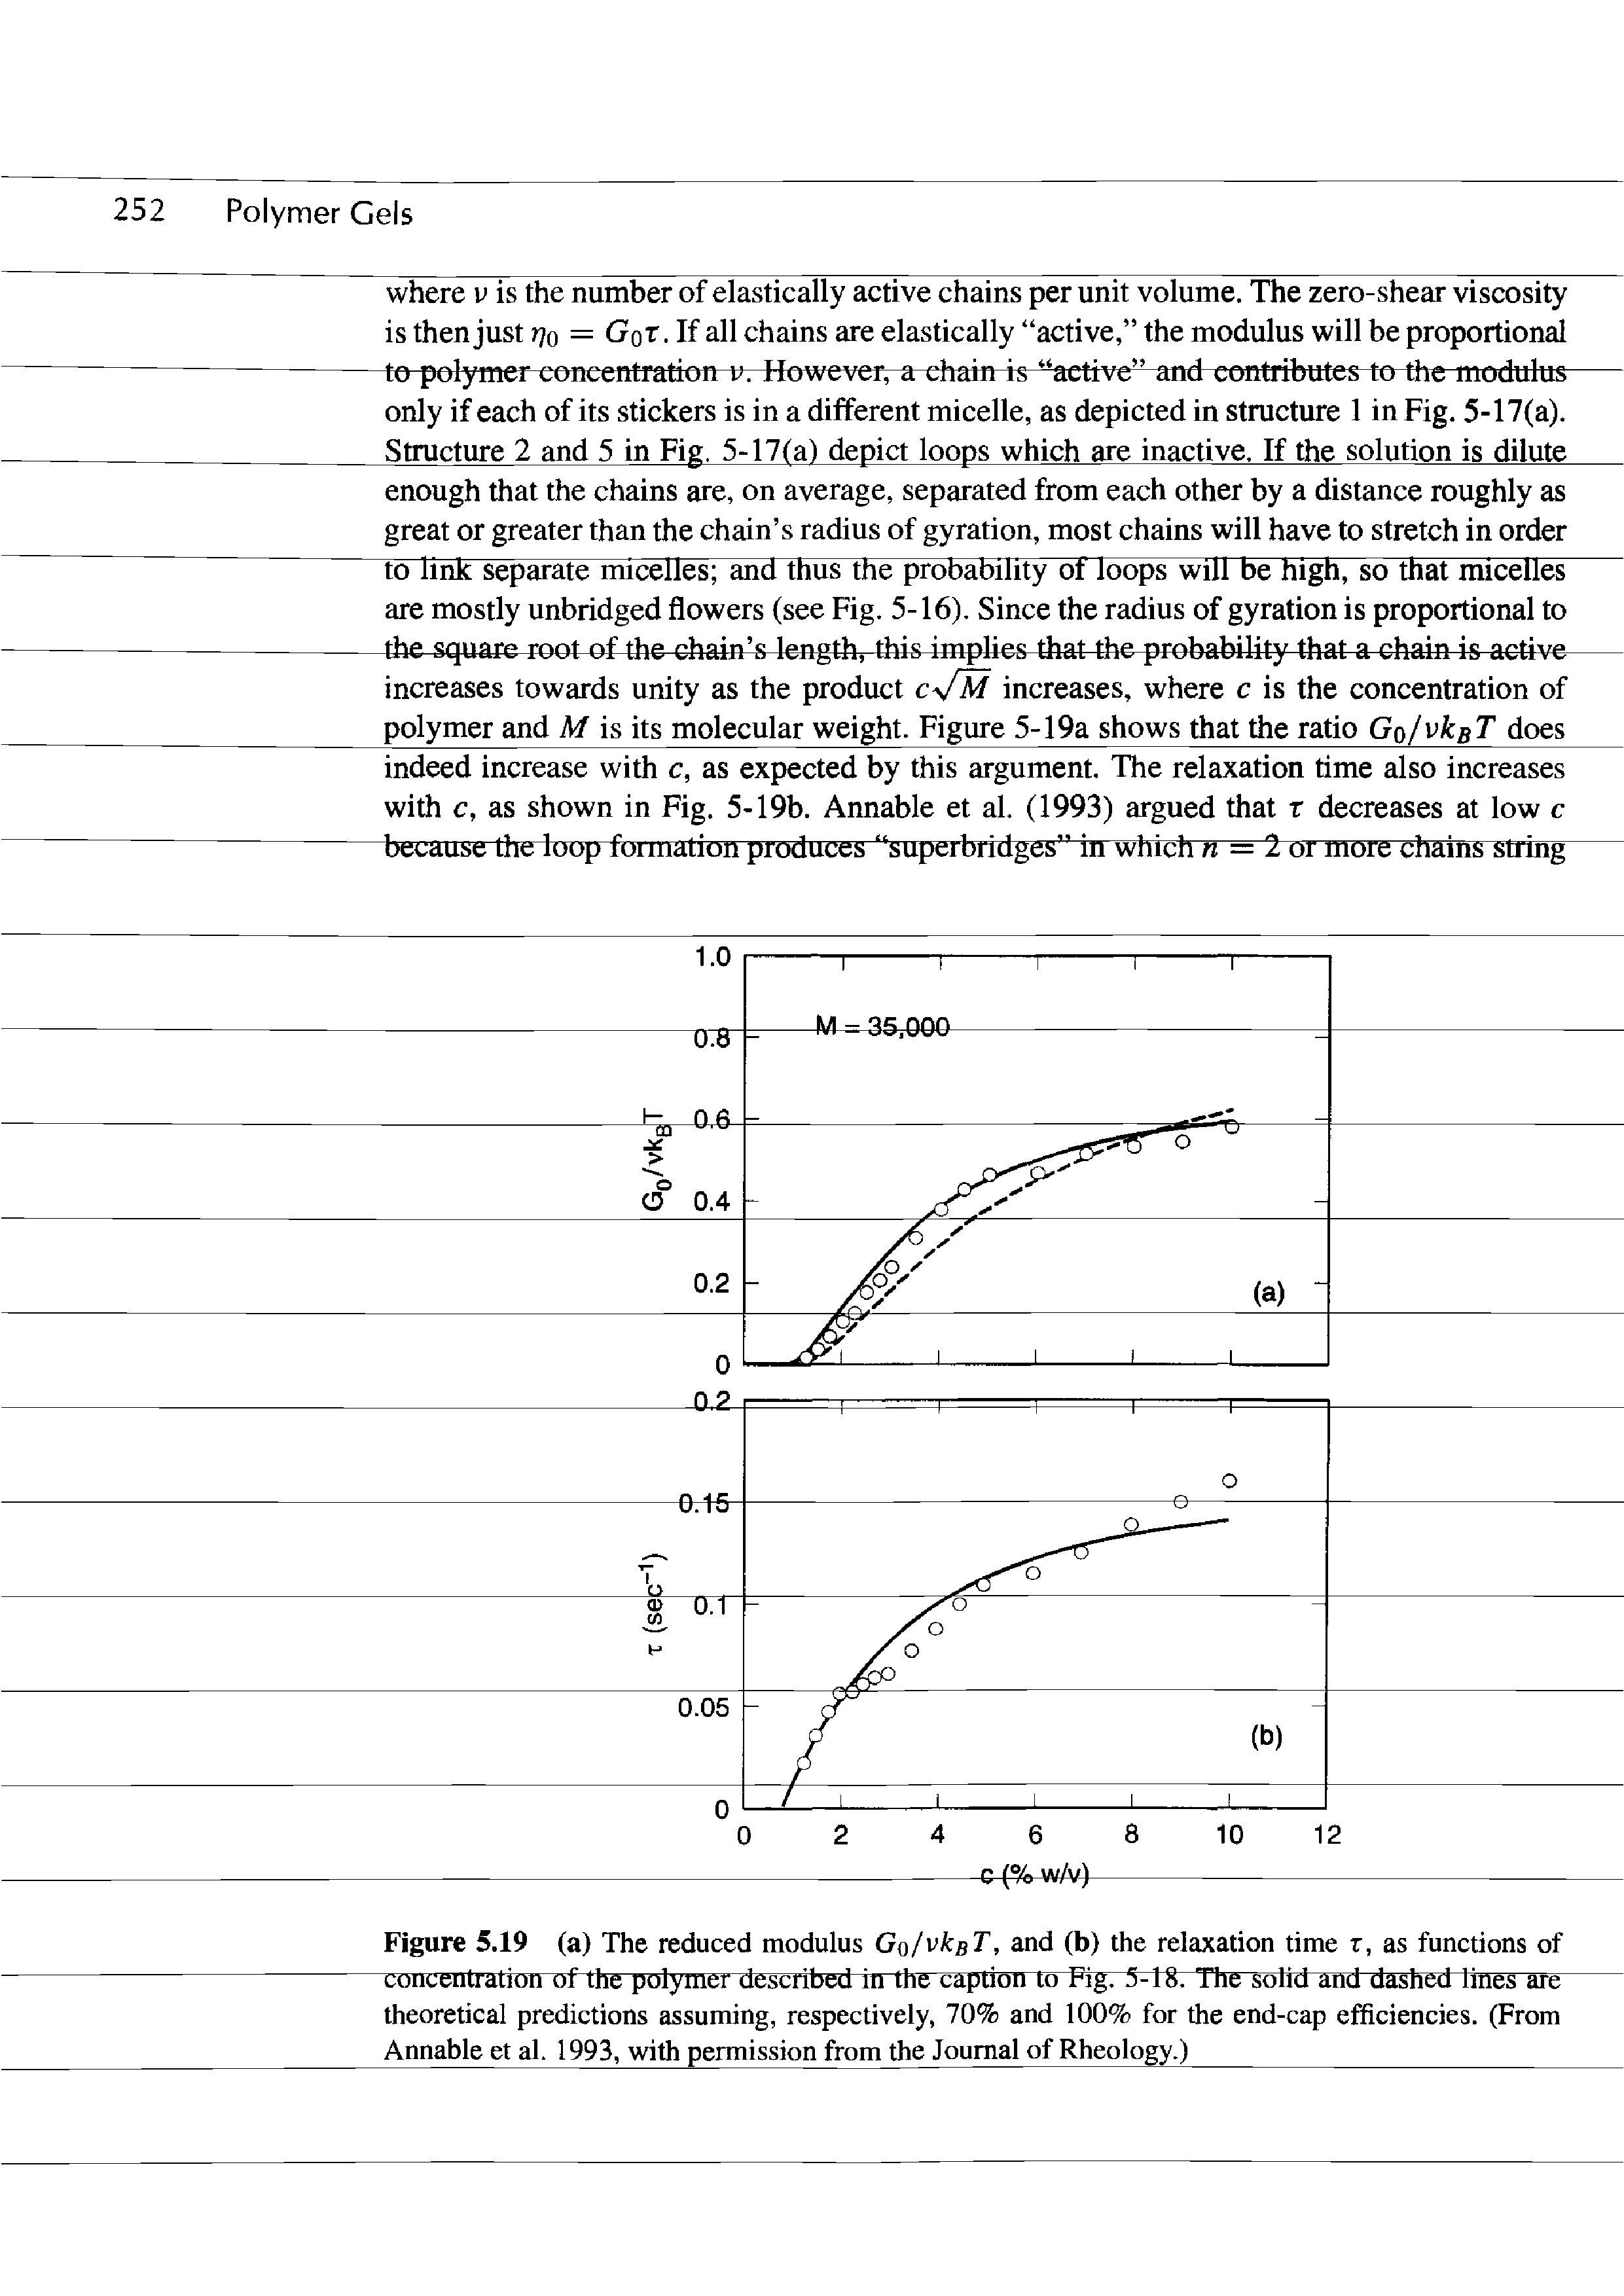 Figure 5.19 (a) The reduced modulus G /vksT, and (b) the relaxation time t, as functions of concentration of the polymer described in the caption to Fig. 5-18. The solid and dashed lines are...